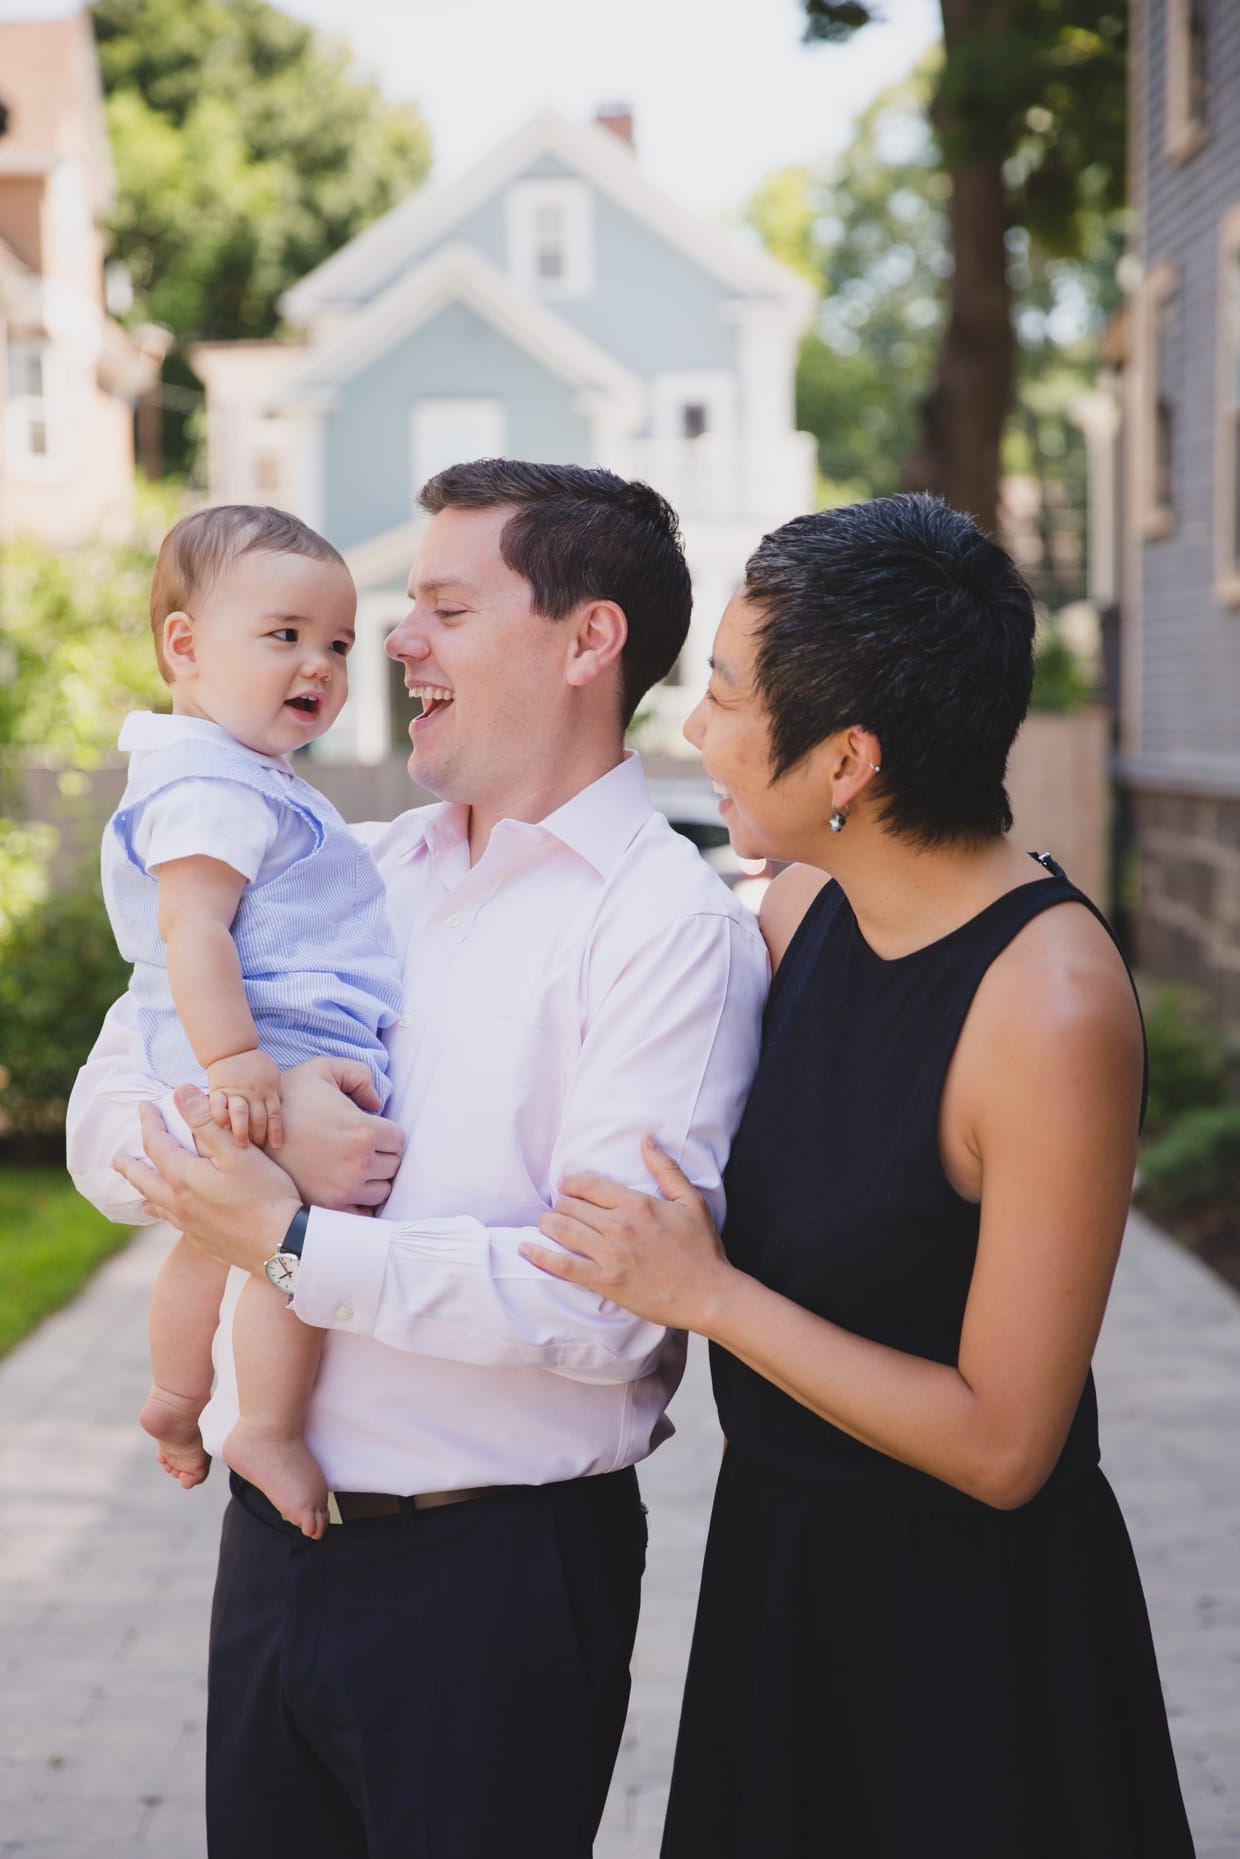 A beautiful photograph of a family outside their Jamaica Plain home during a family photo session.